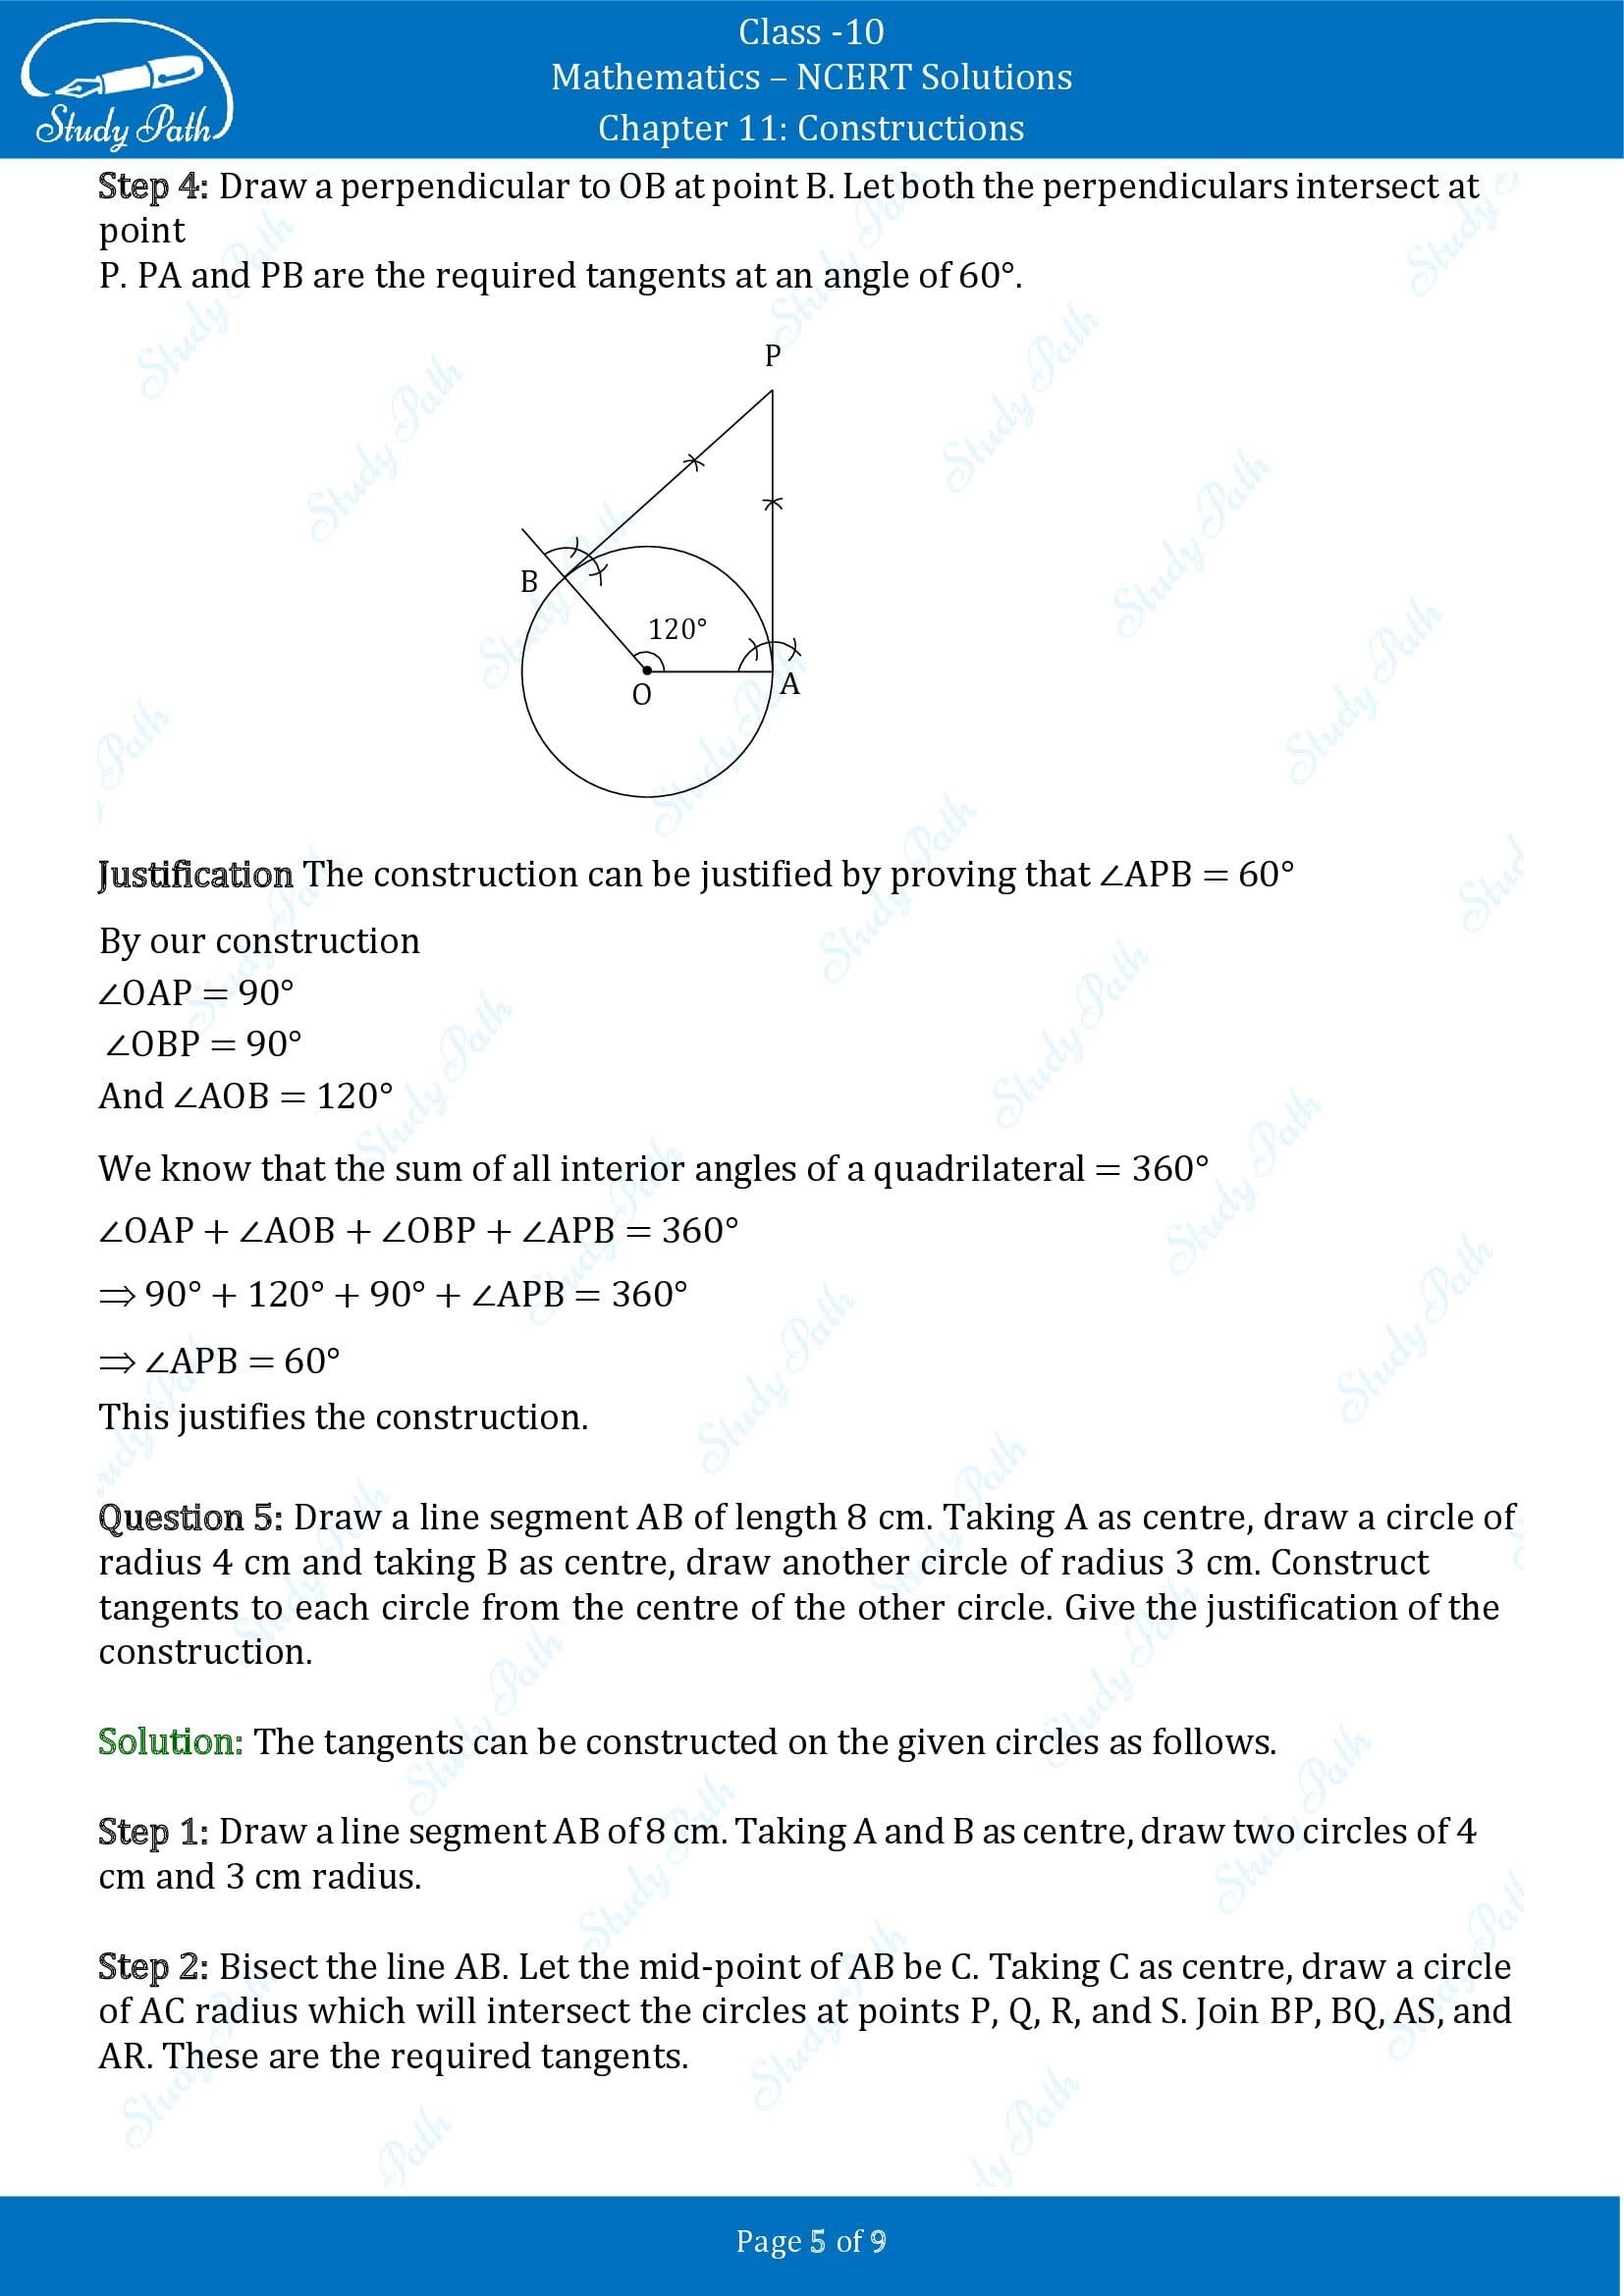 NCERT Solutions for Class 10 Maths Chapter 11 Constructions Exercise 11.2 00005